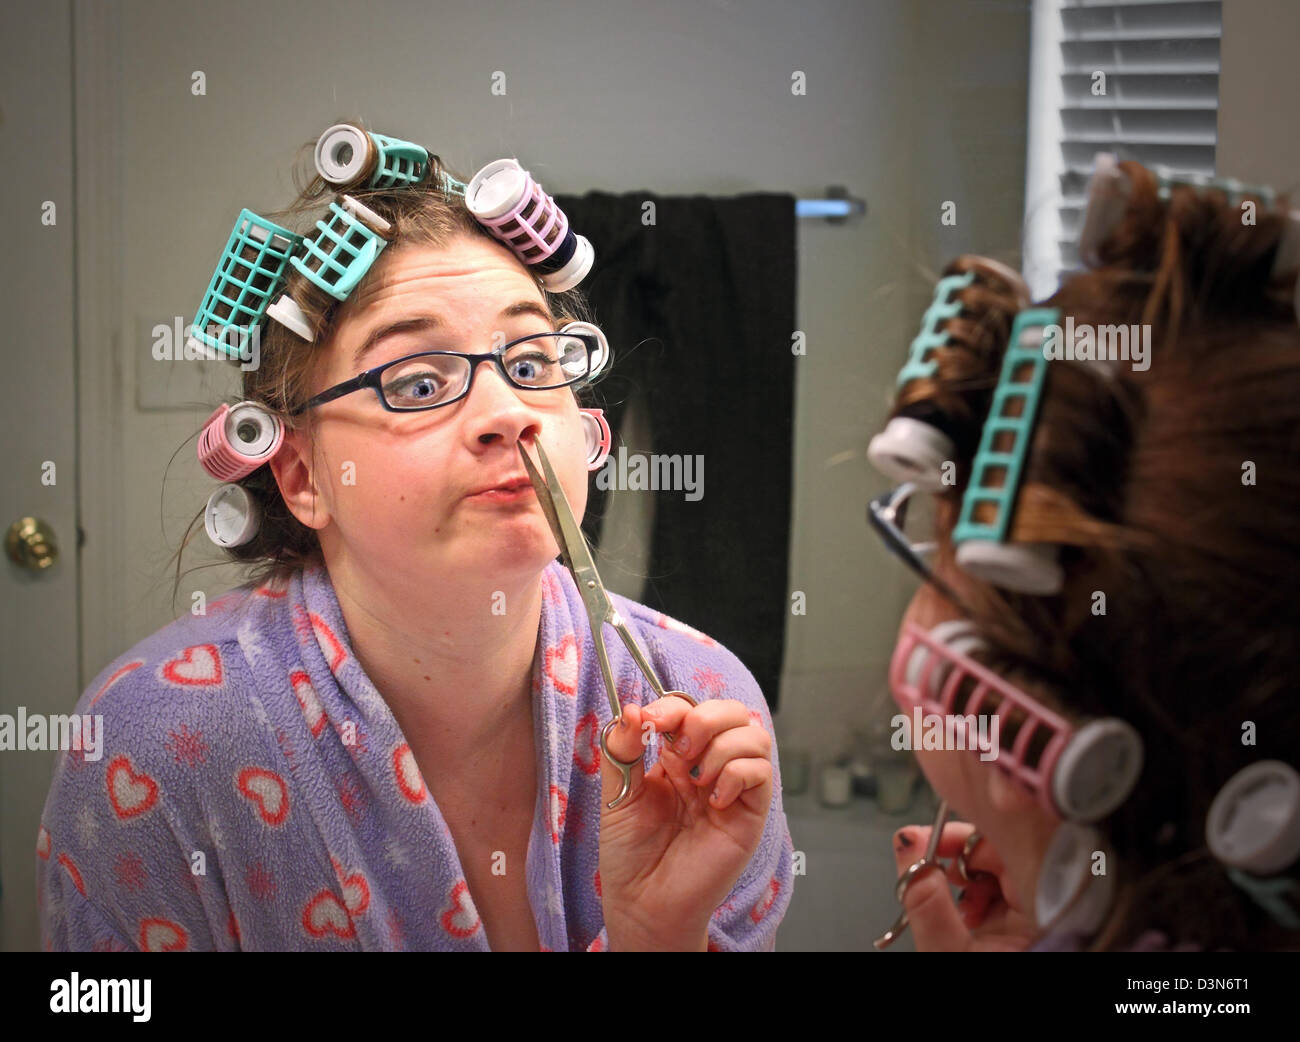 A young woman with curlers and glasses makes a funny face while trimming her nose hairs Stock Photo